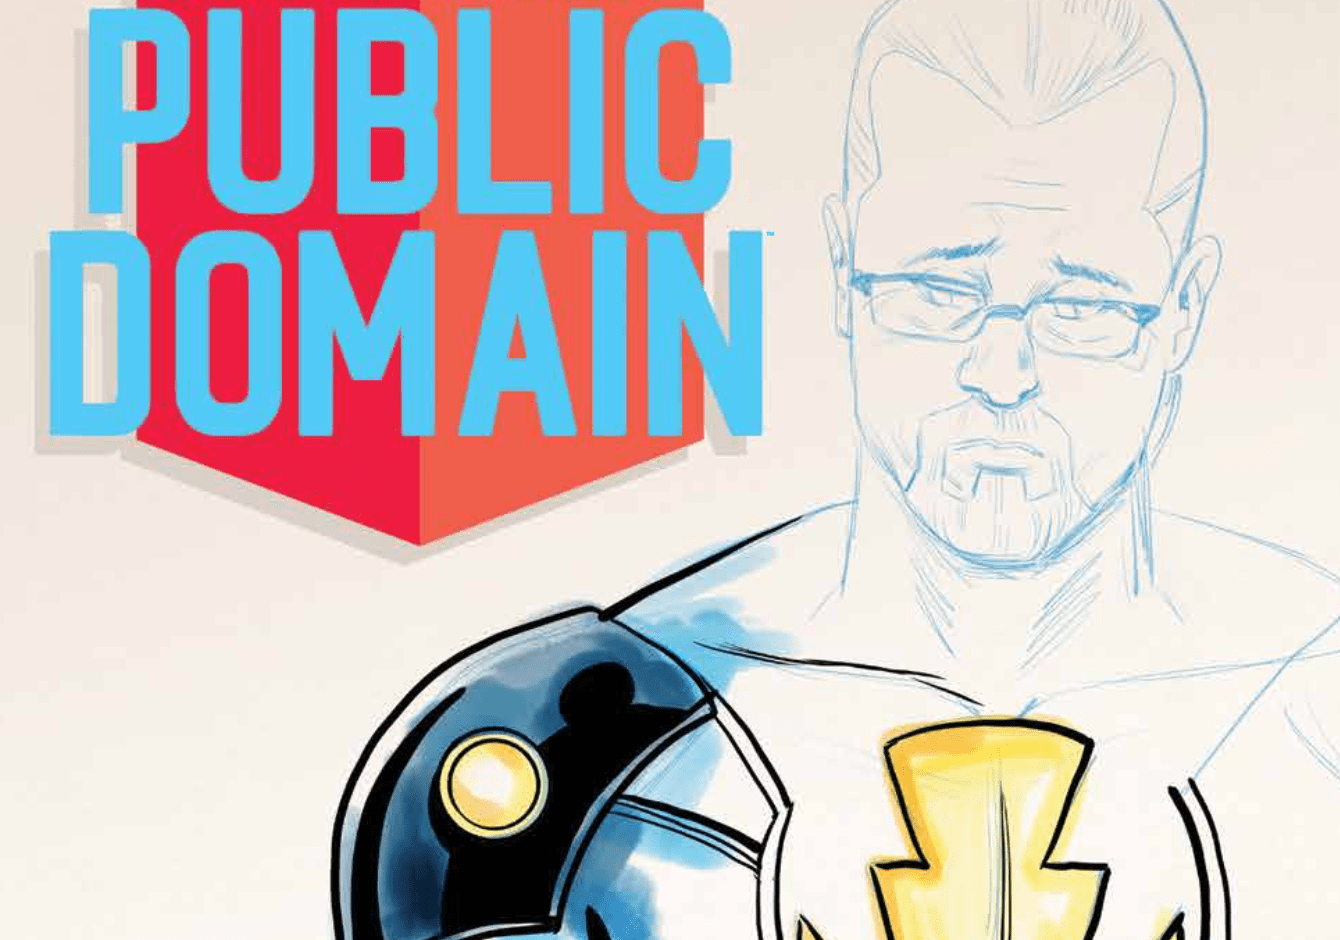 'Public Domain' #6 skillfully captures the reality of making comics